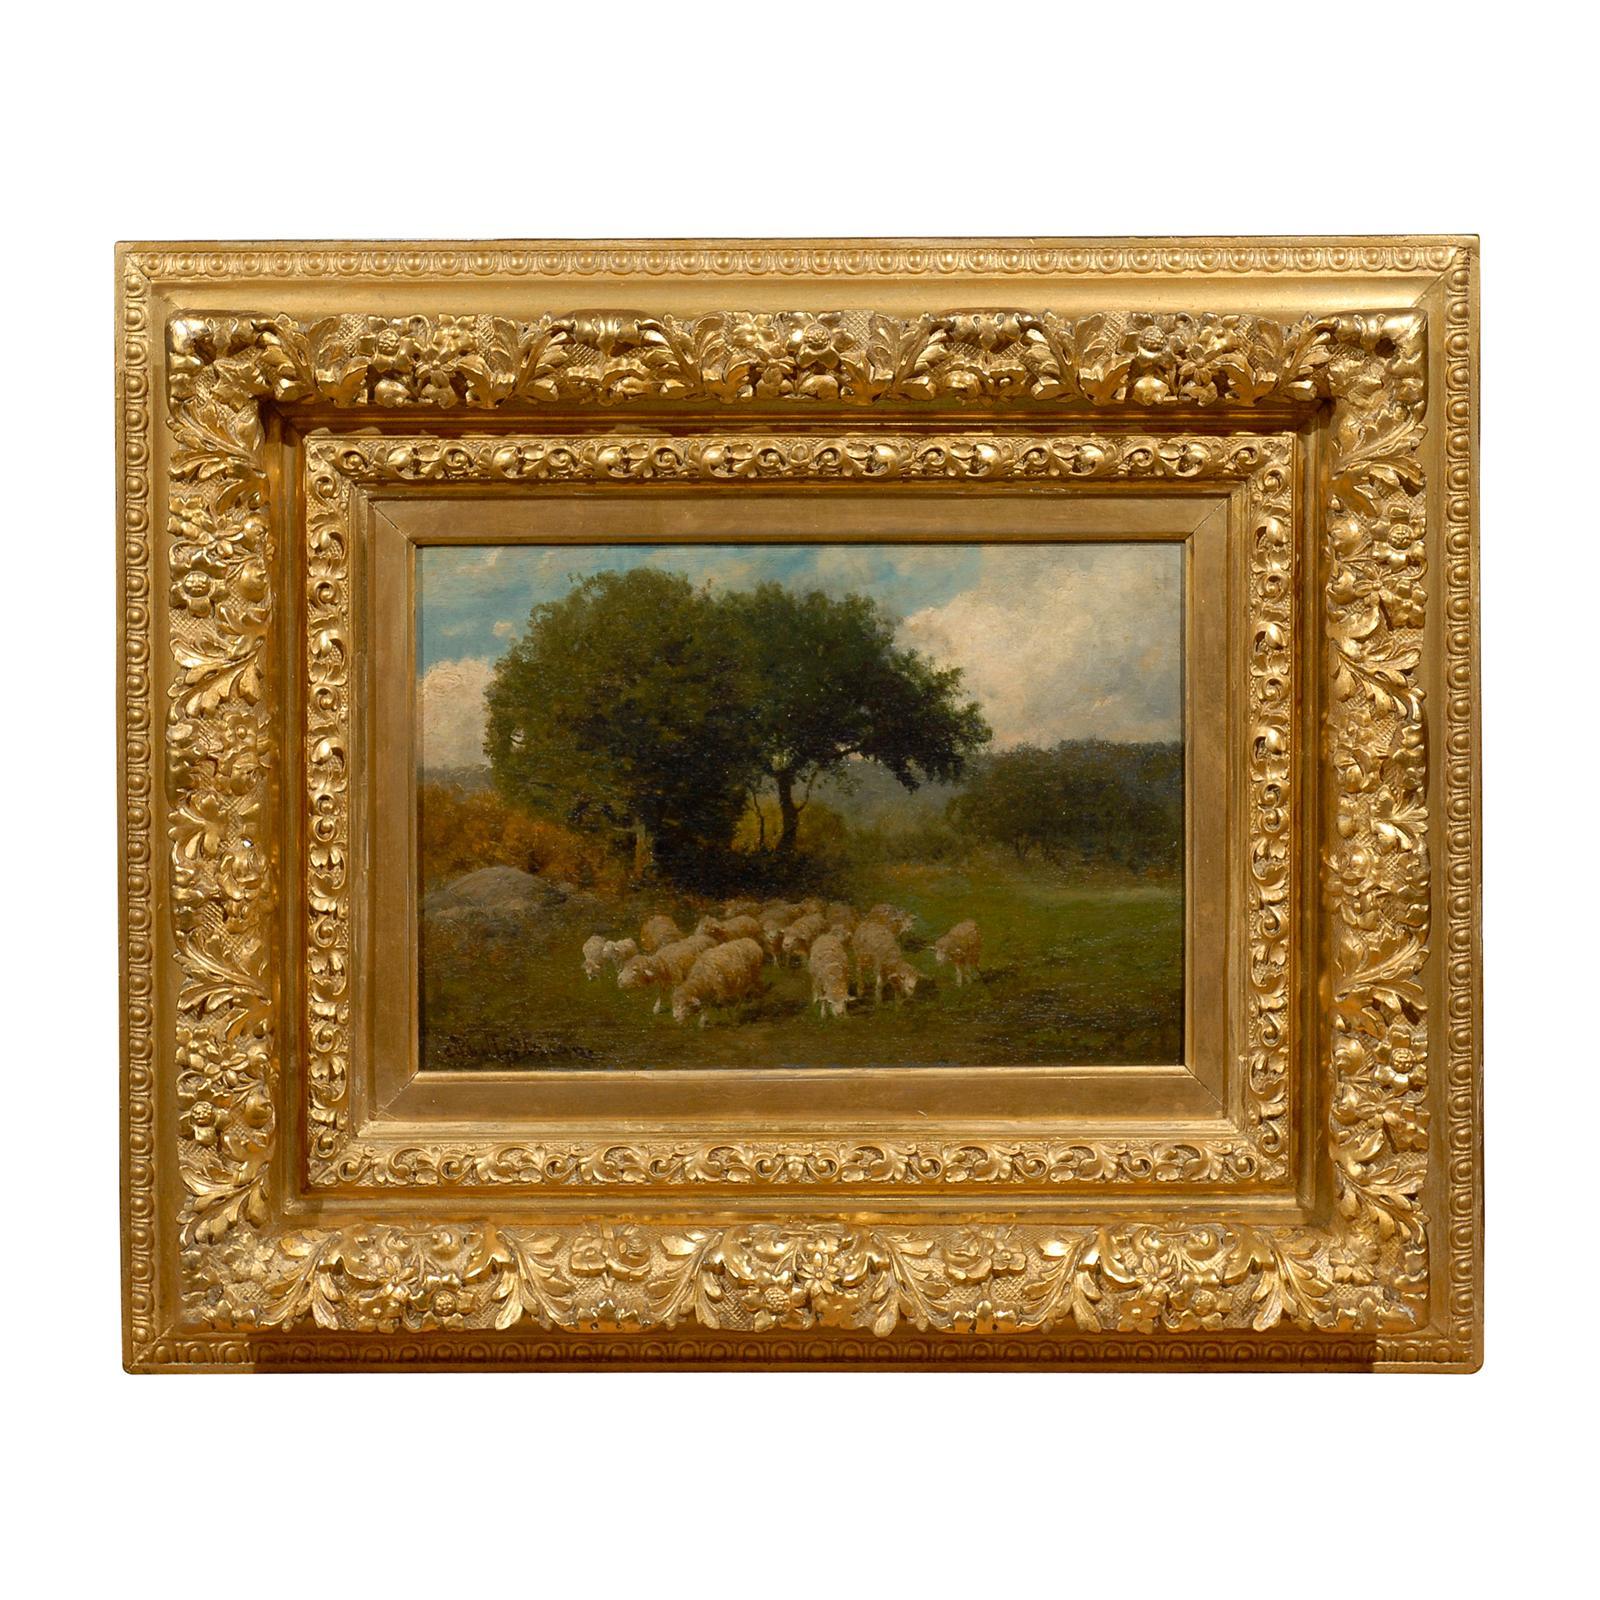 Antique Sheep Oil Painting Signed by Charles Phelan